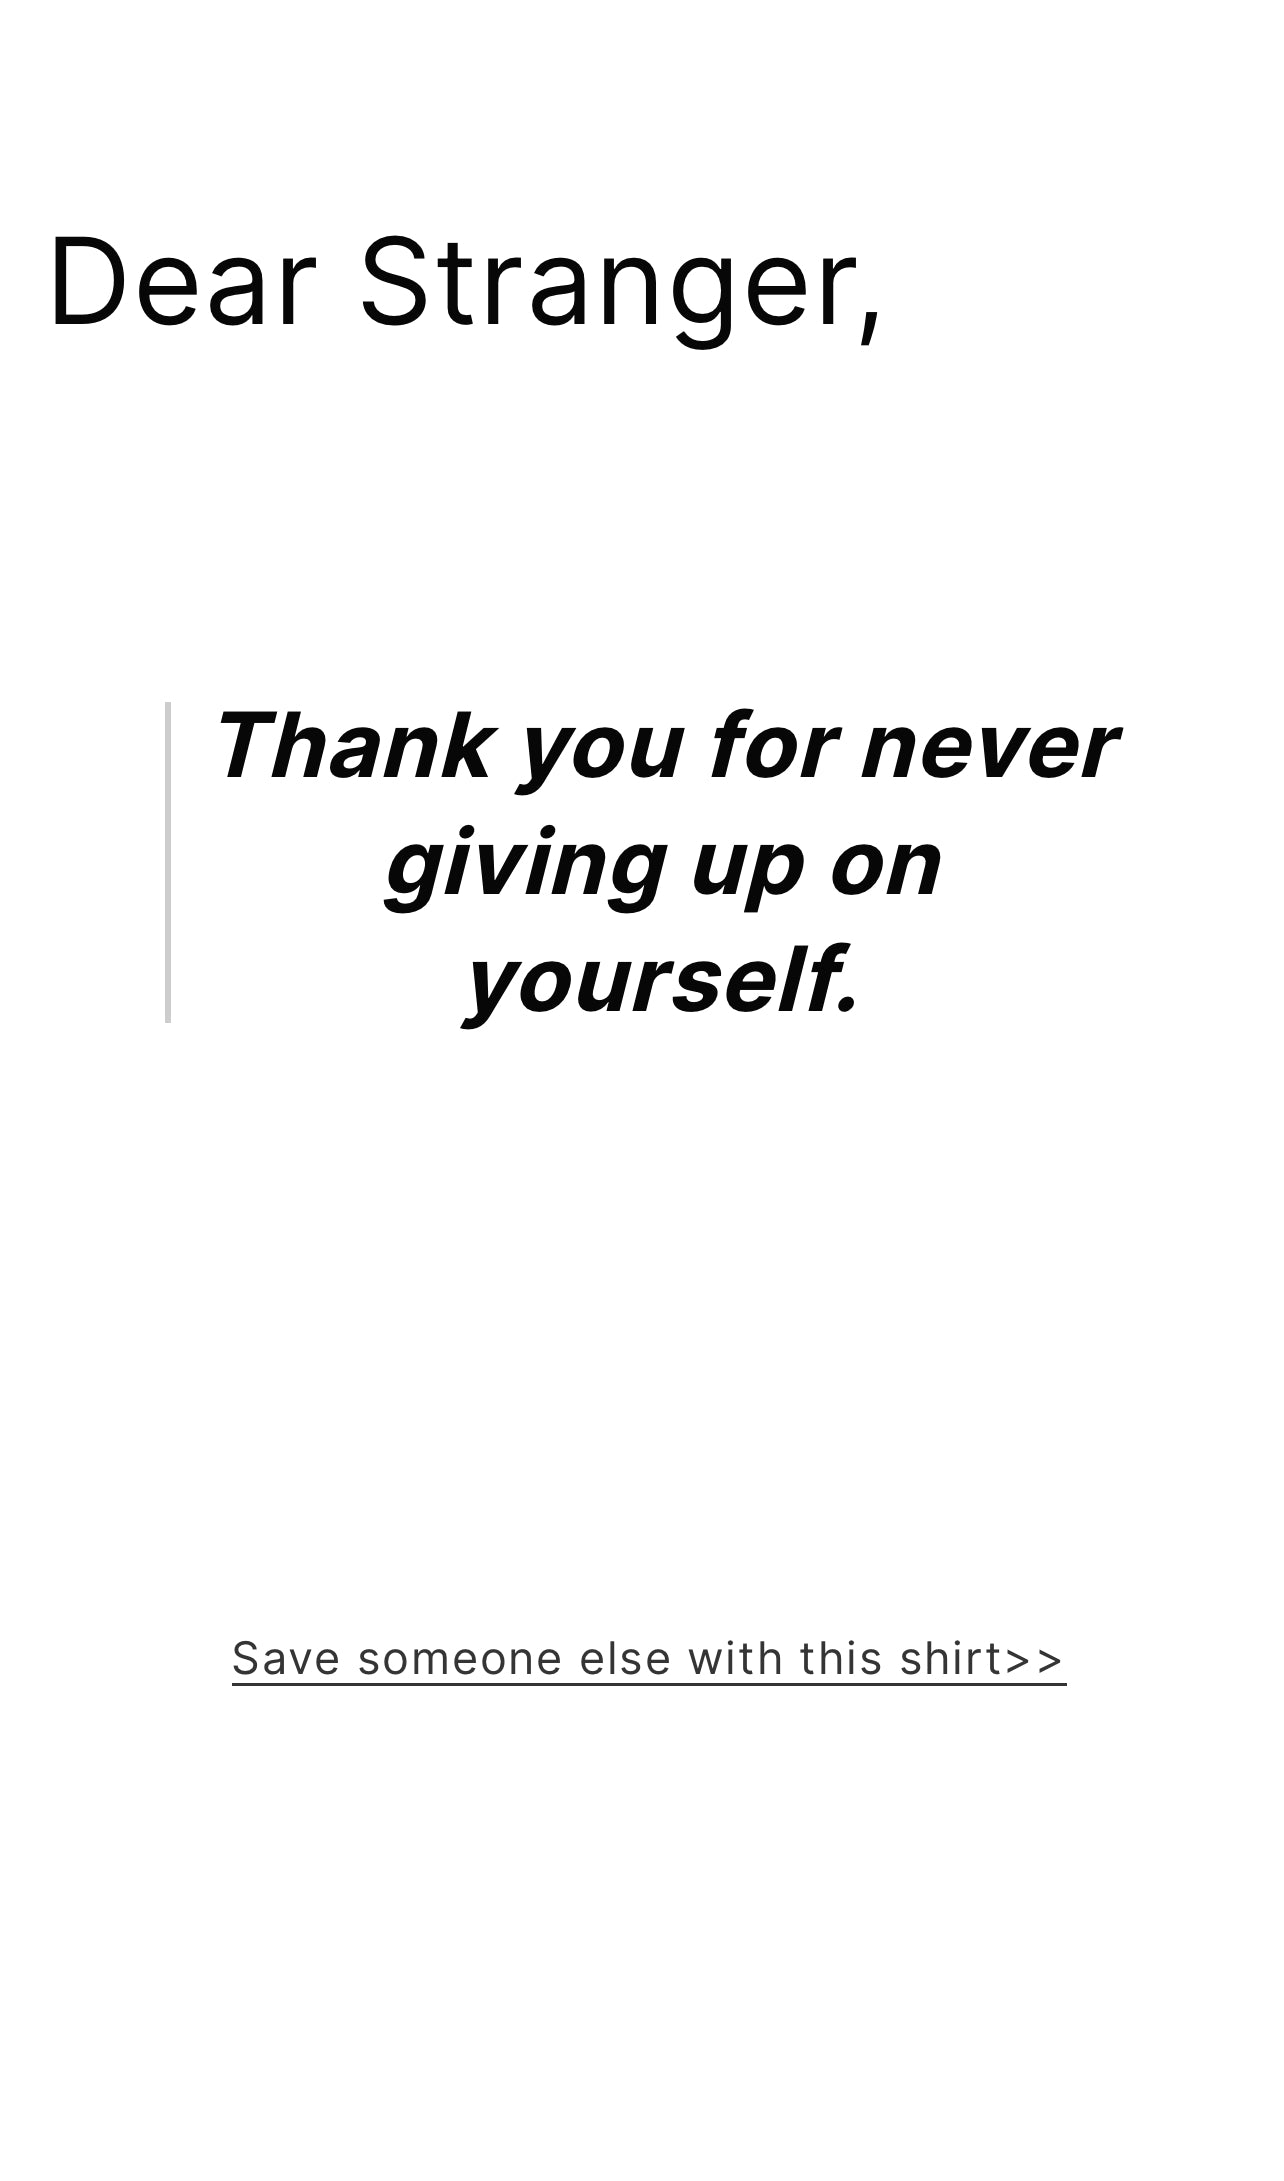 QR code T-Shirt
 "Thank you for never giving up on yourself.”